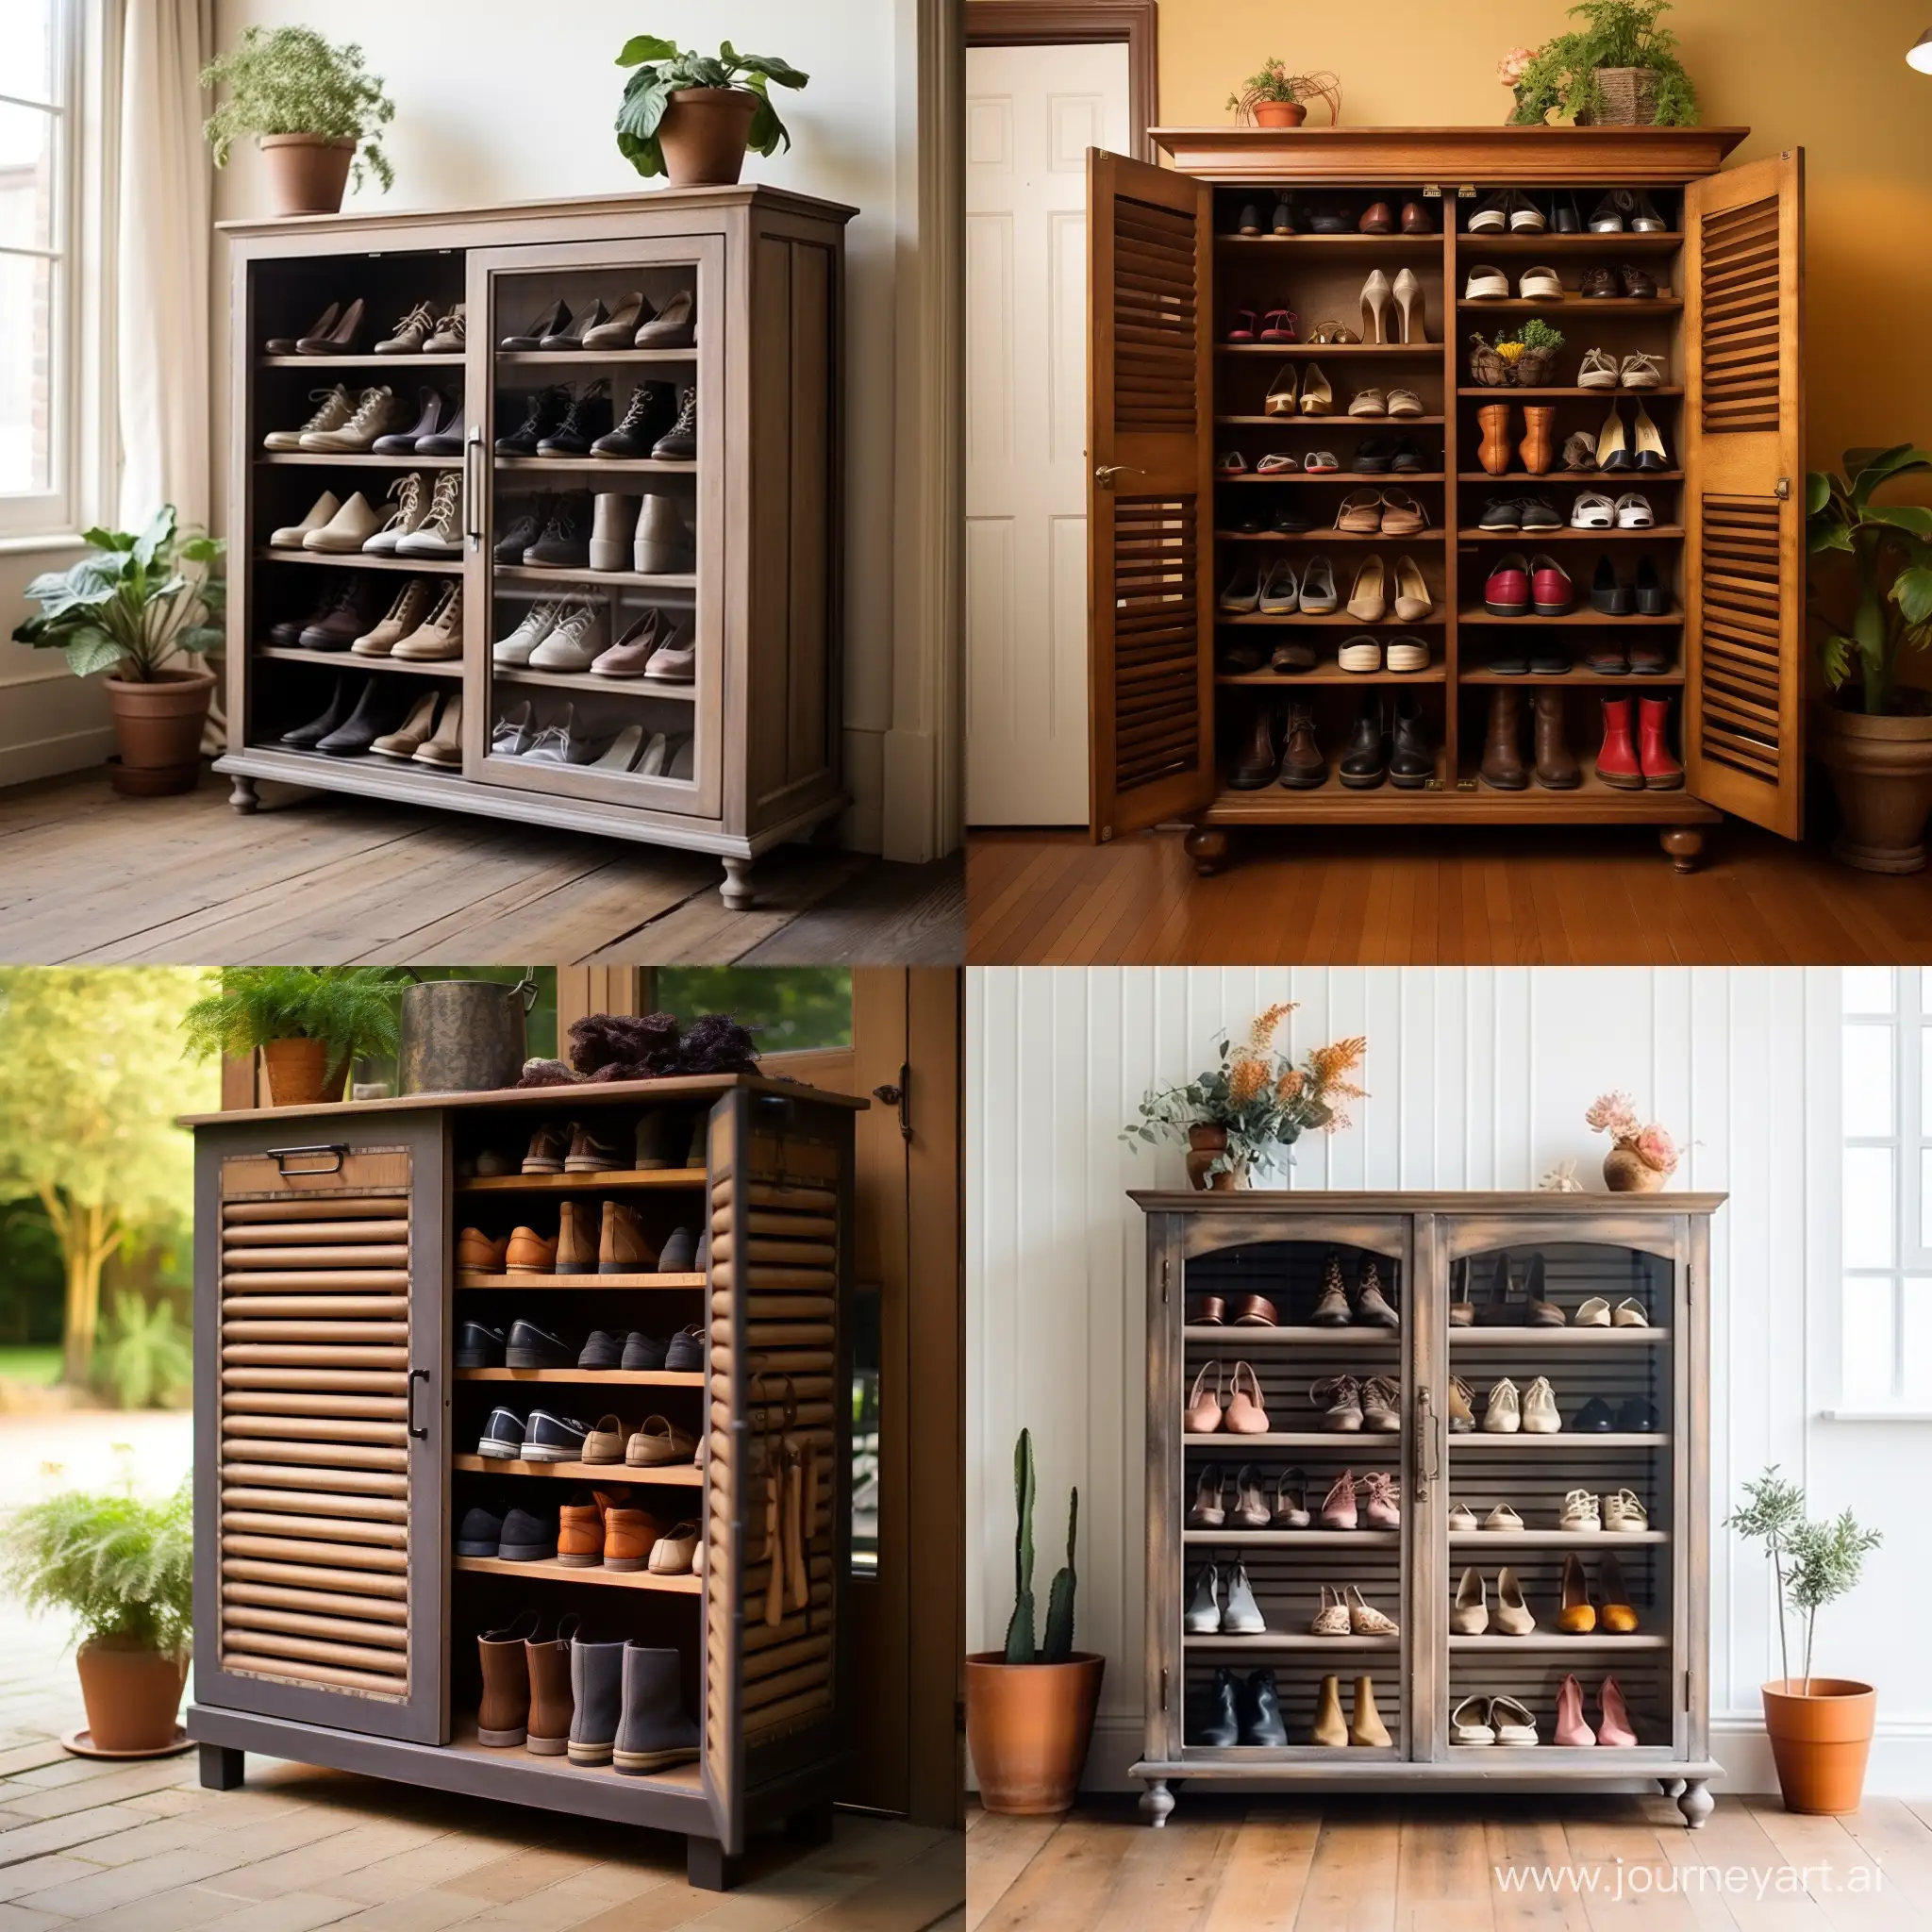 Neat-and-Functional-Shoe-Rack-with-Closed-Shelves-by-the-House-Door